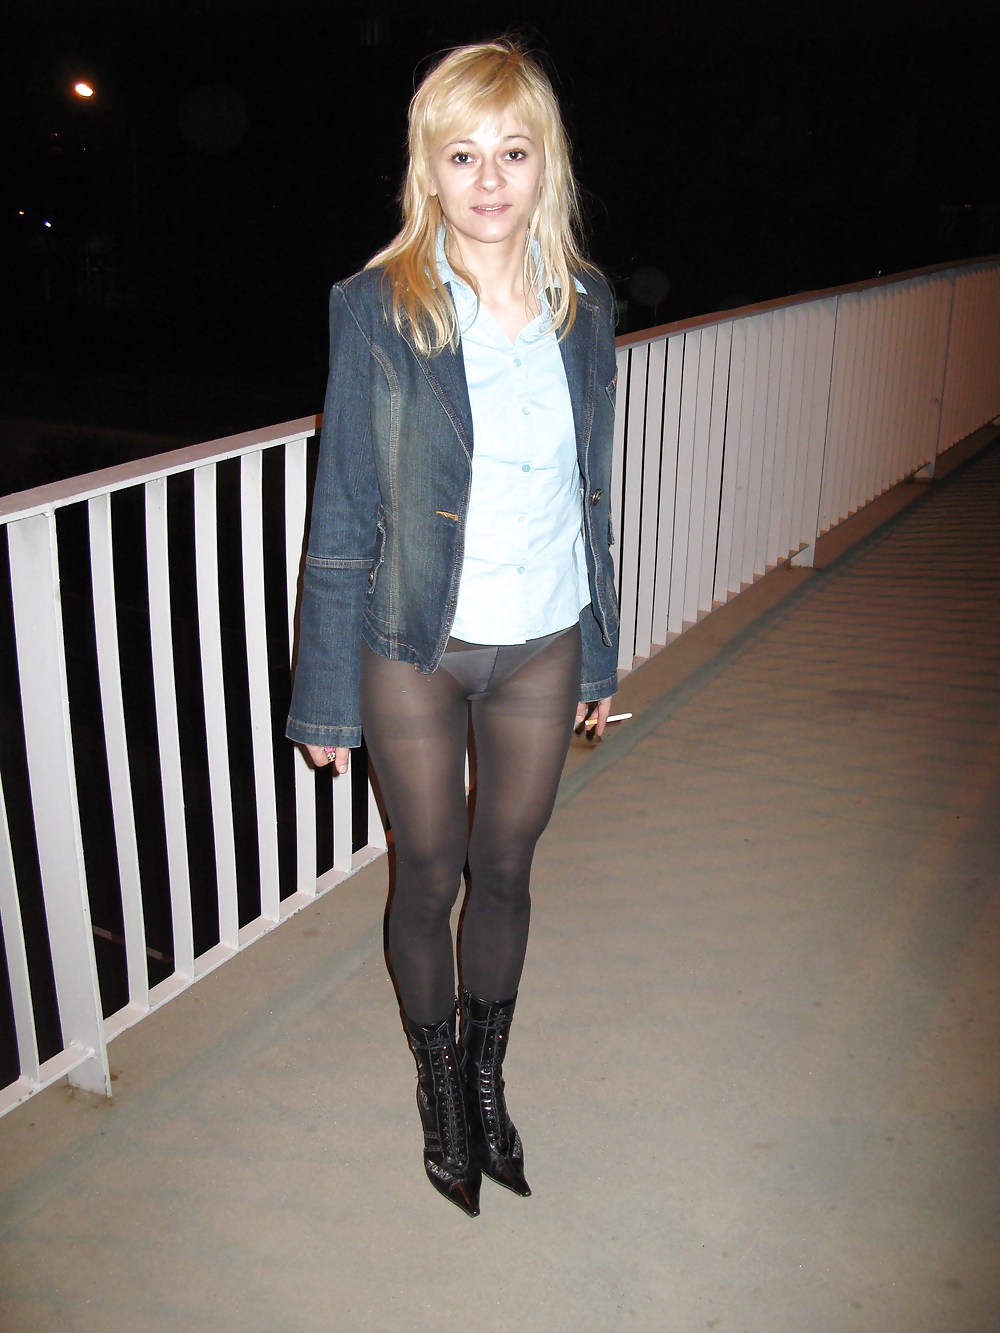 Babes in pantyhose-going for a walk.
 #35925714